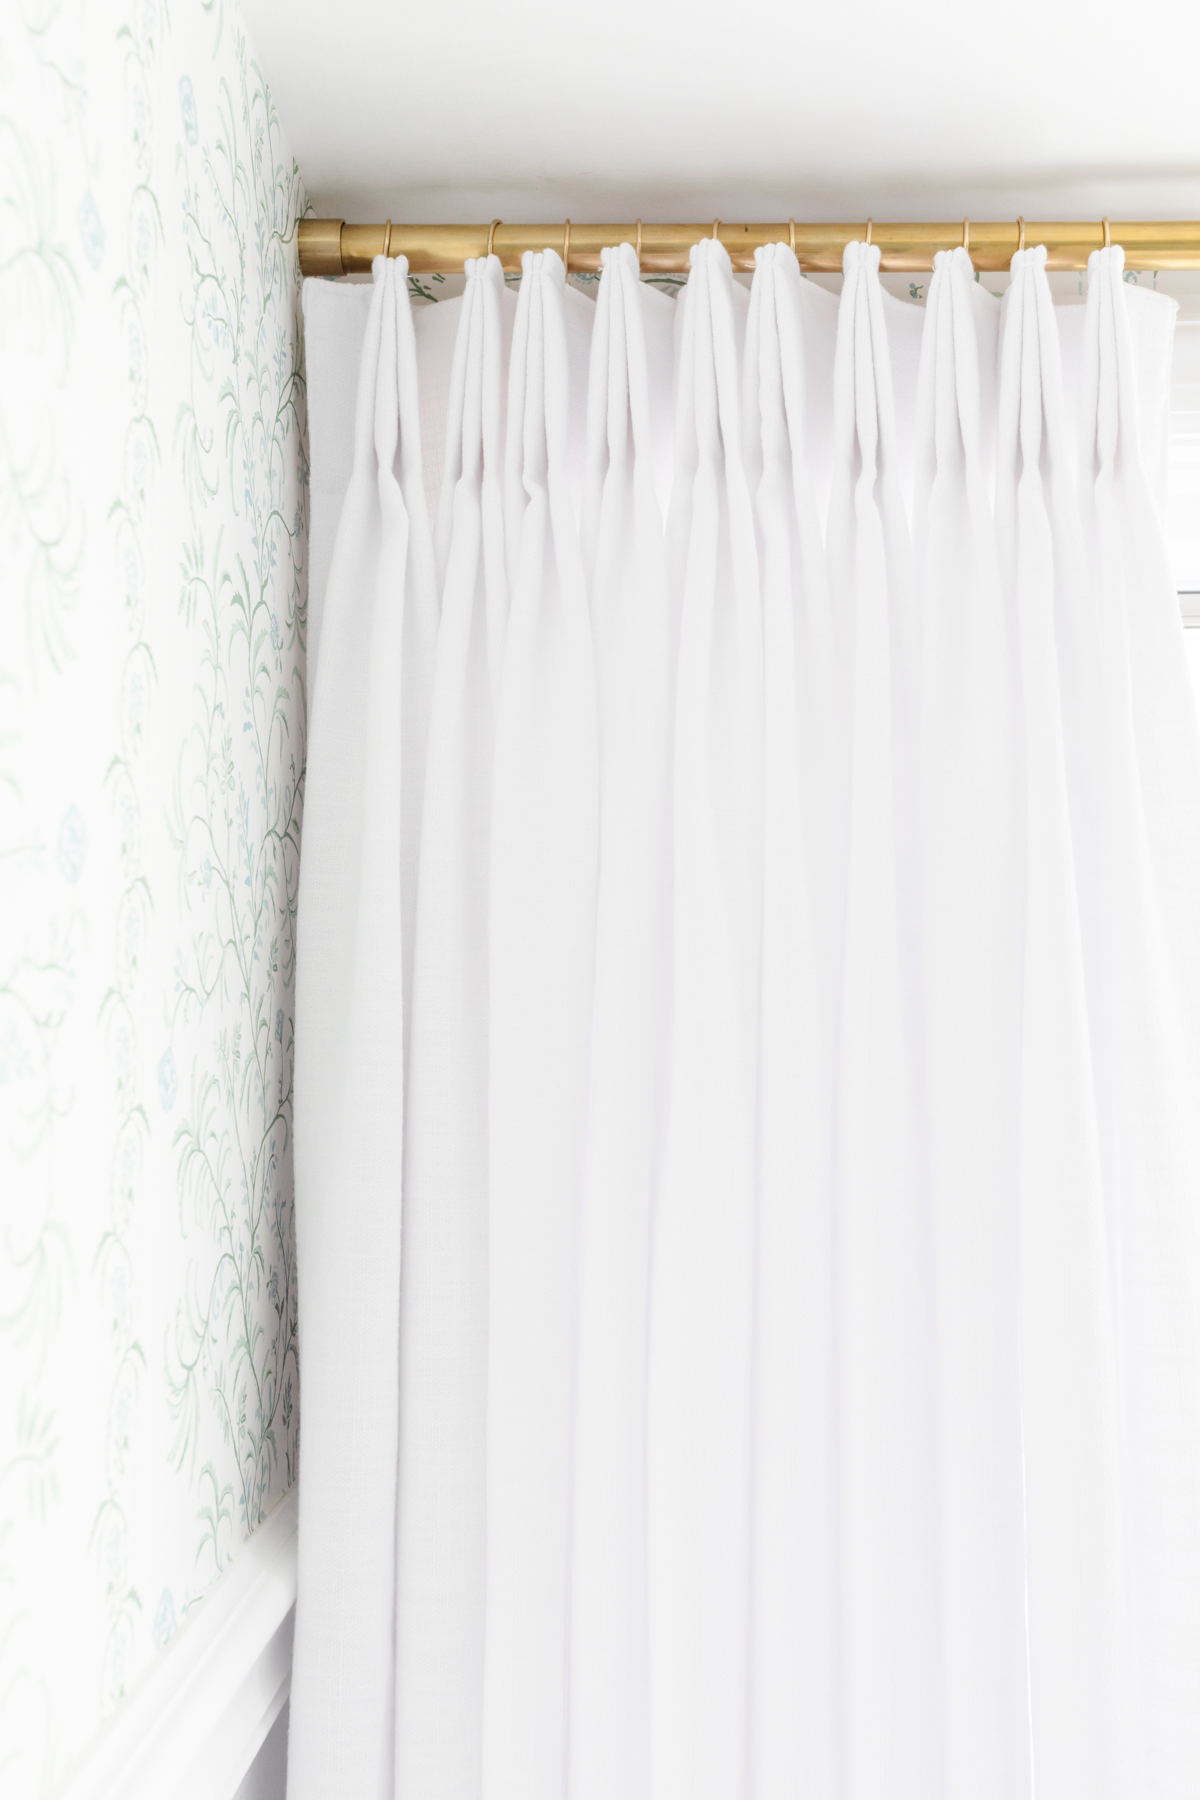 wallpaper and white curtains